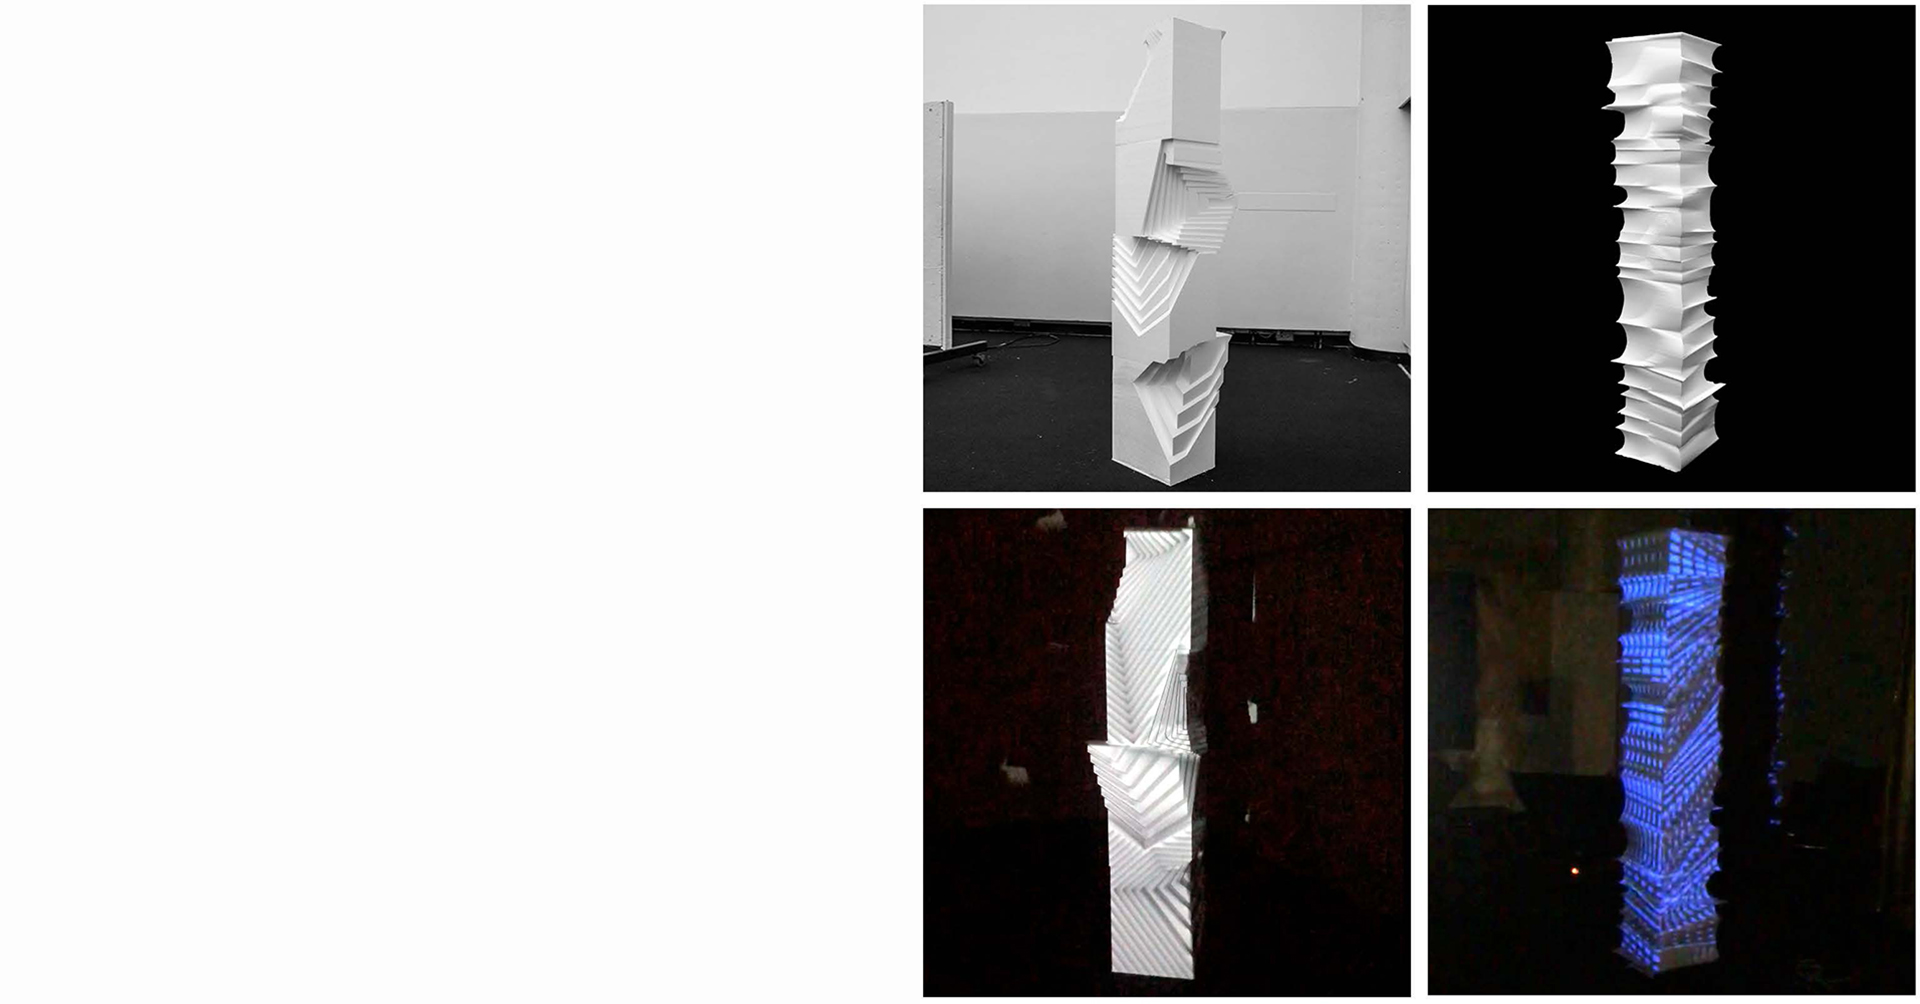 Example fabricated columns showing the final fabricated artifact (above) and a still image of the animated projection installation (below).